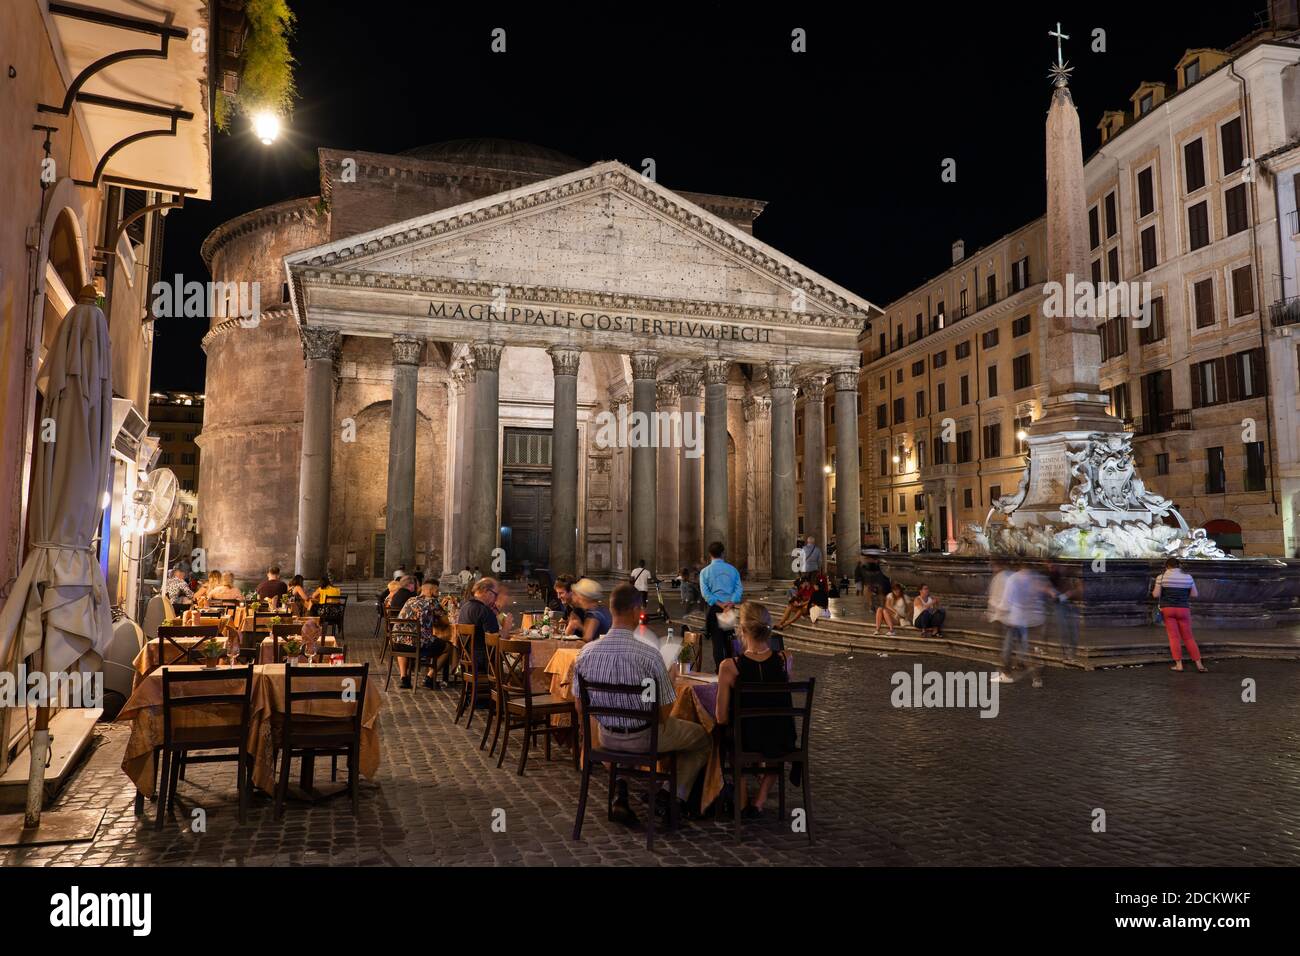 City of Rome at night in Italy, the Pantheon ancient Roman temple as seen from Piazza della Rotonda square with cafe tables, fountain and ancient Egyp Stock Photo